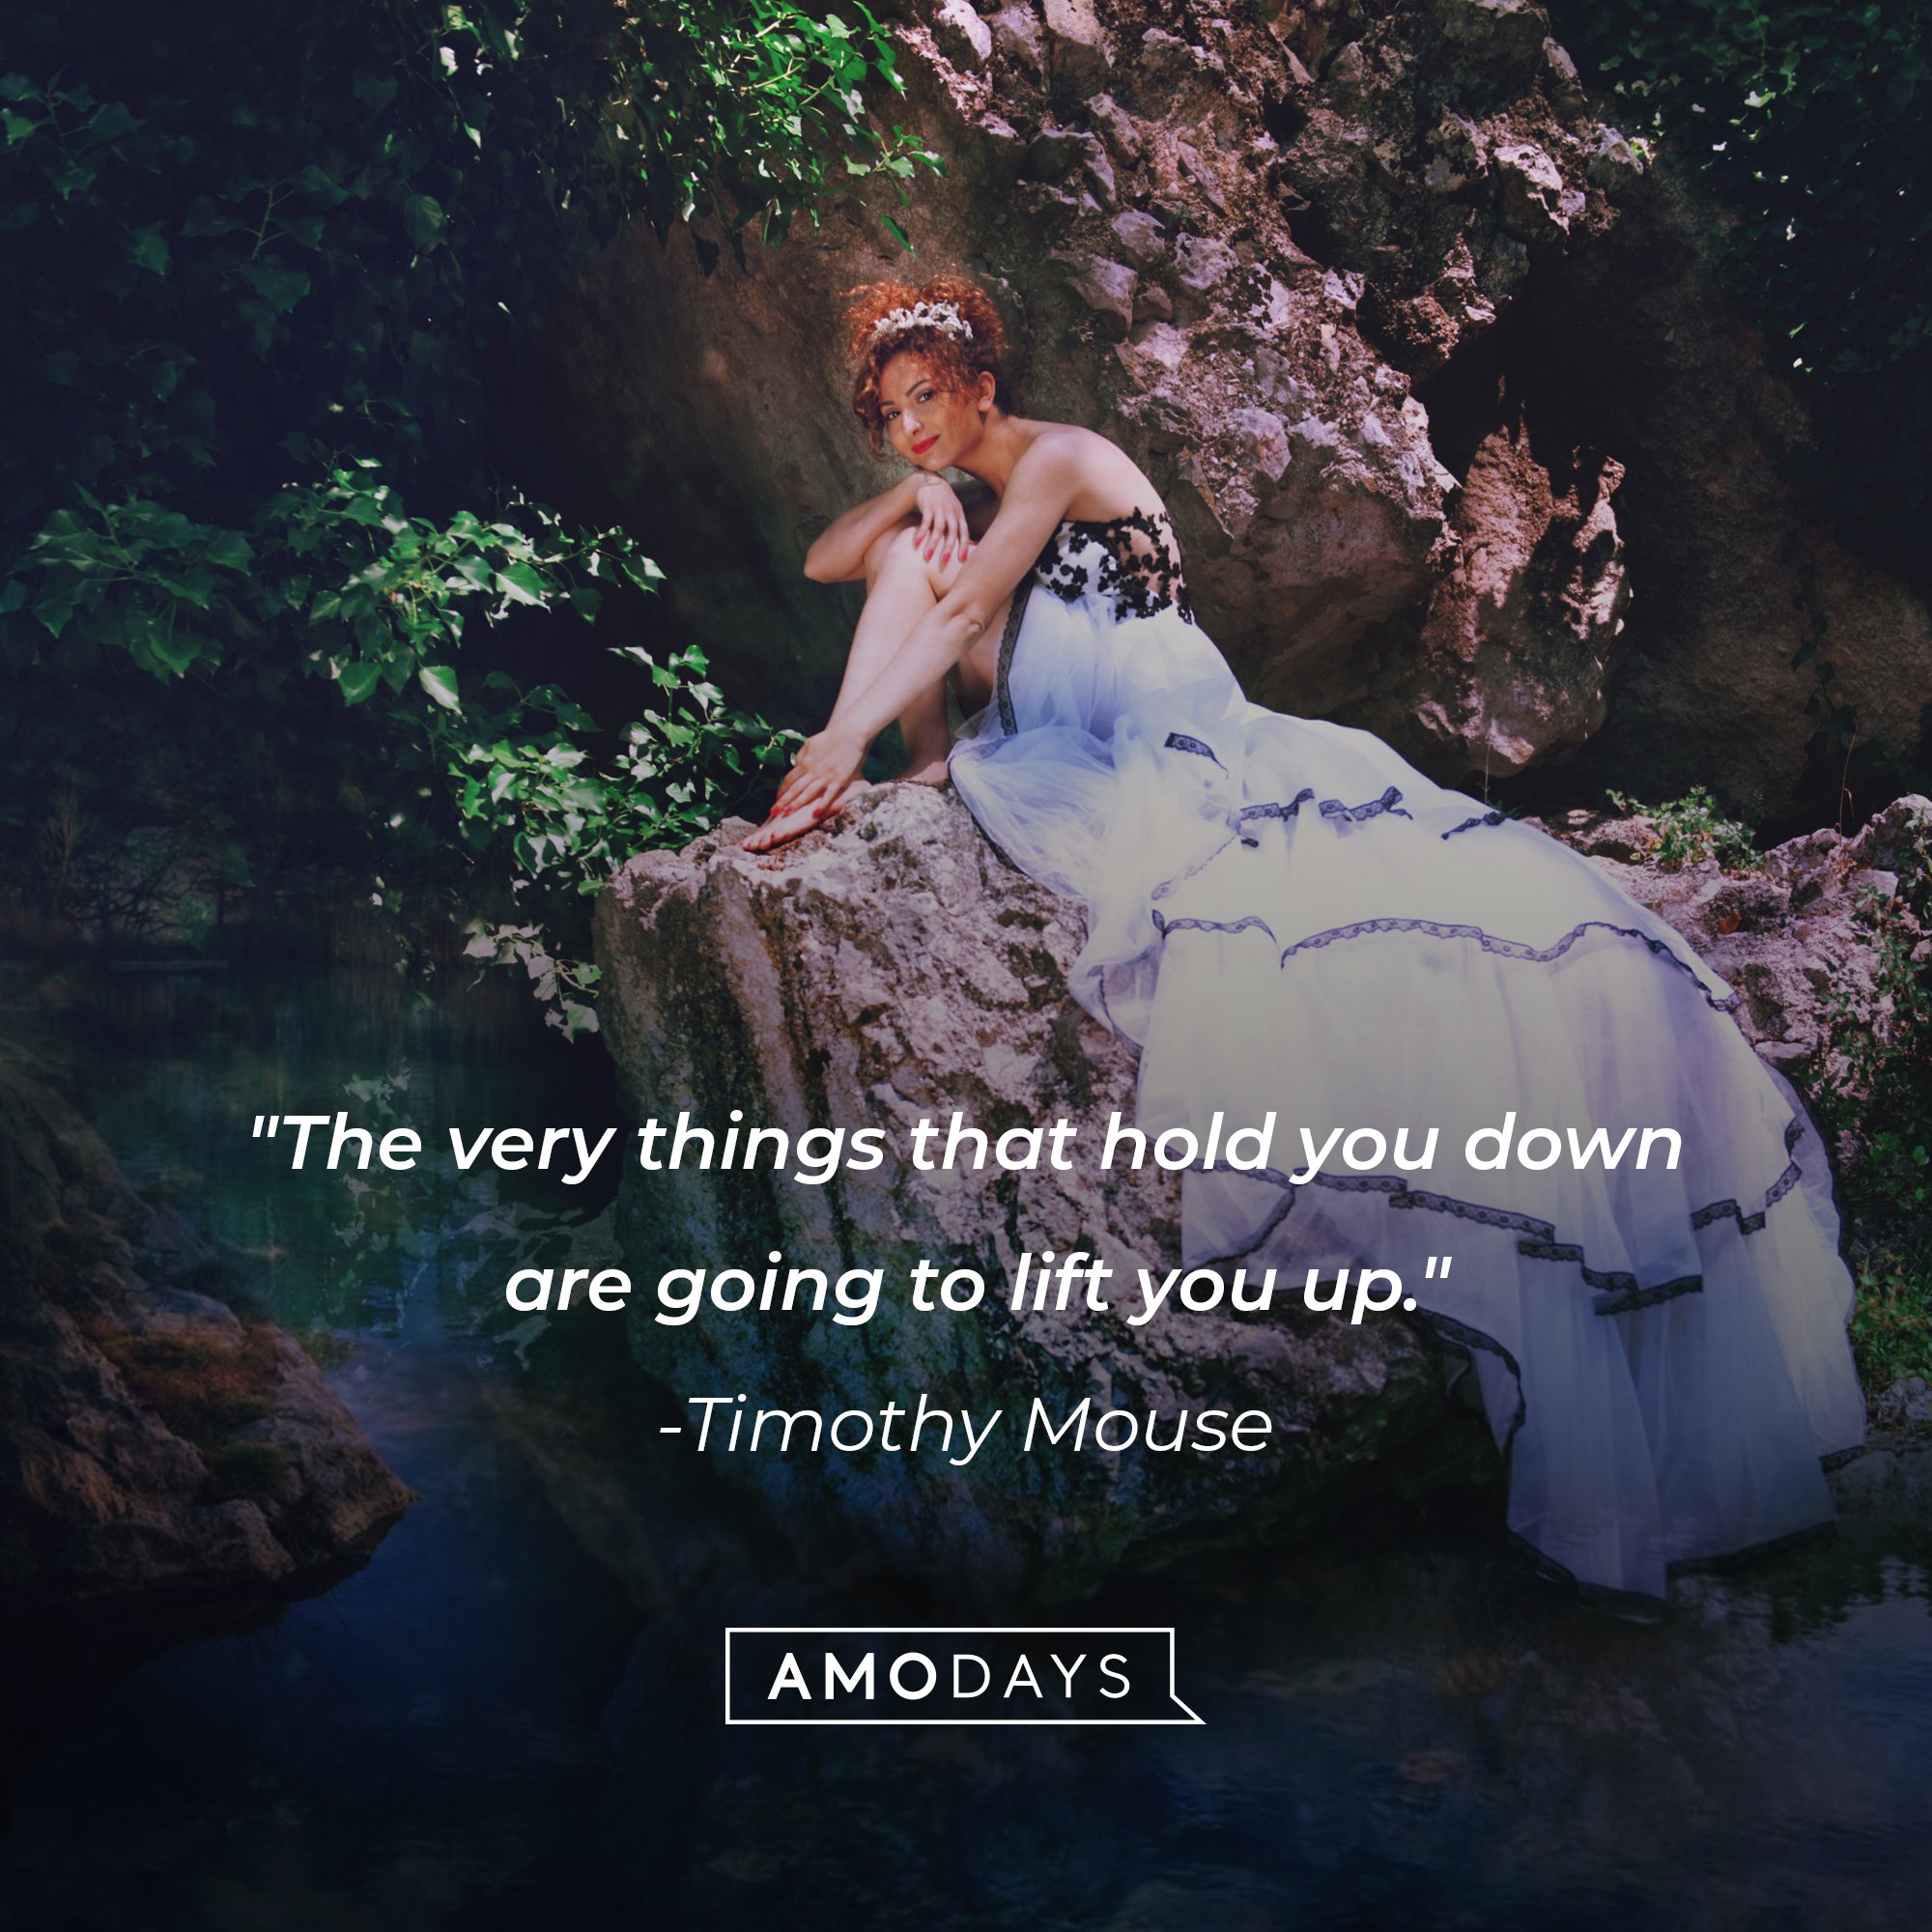 Timothy Mouse's quote: "The very things that hold you down are going to lift you up." | Image: Amo Days